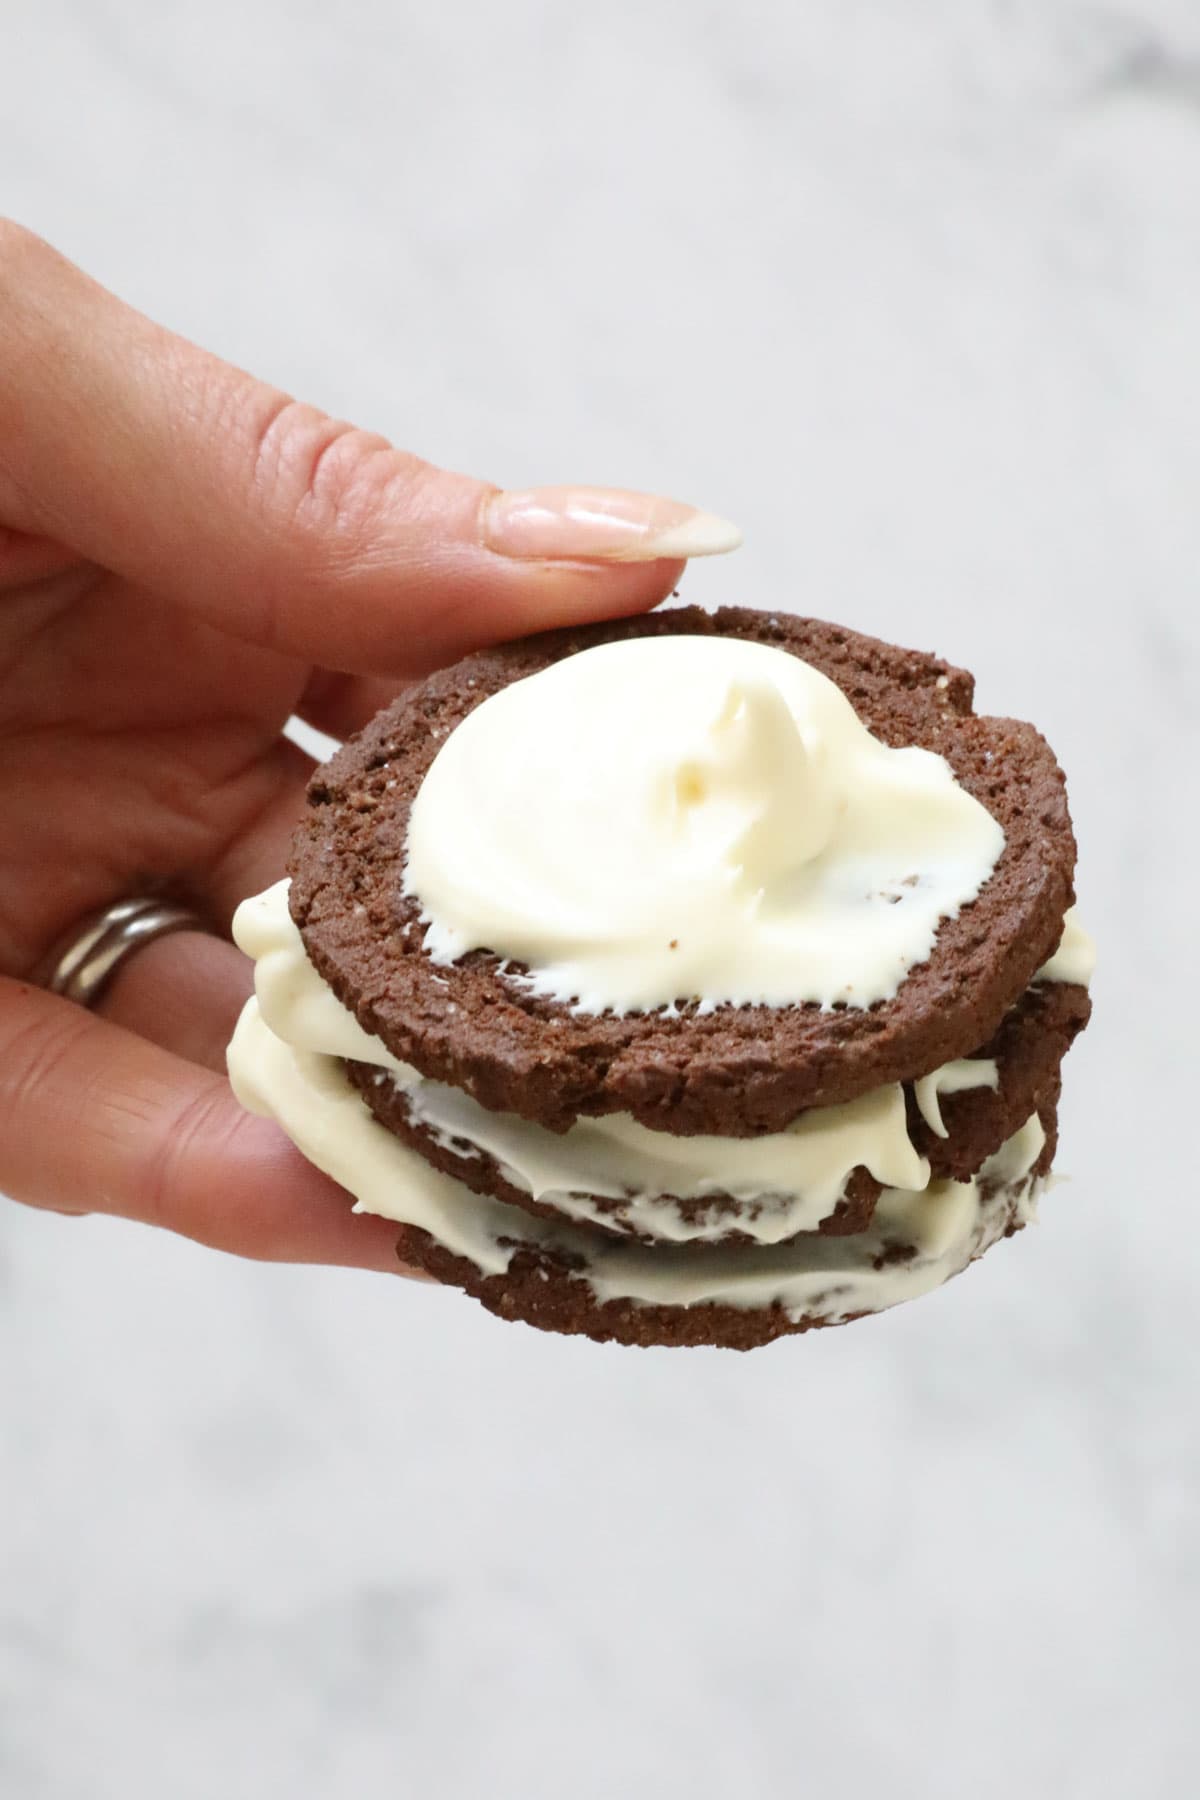 A stack of choc ripple biscuits and whipped cream.